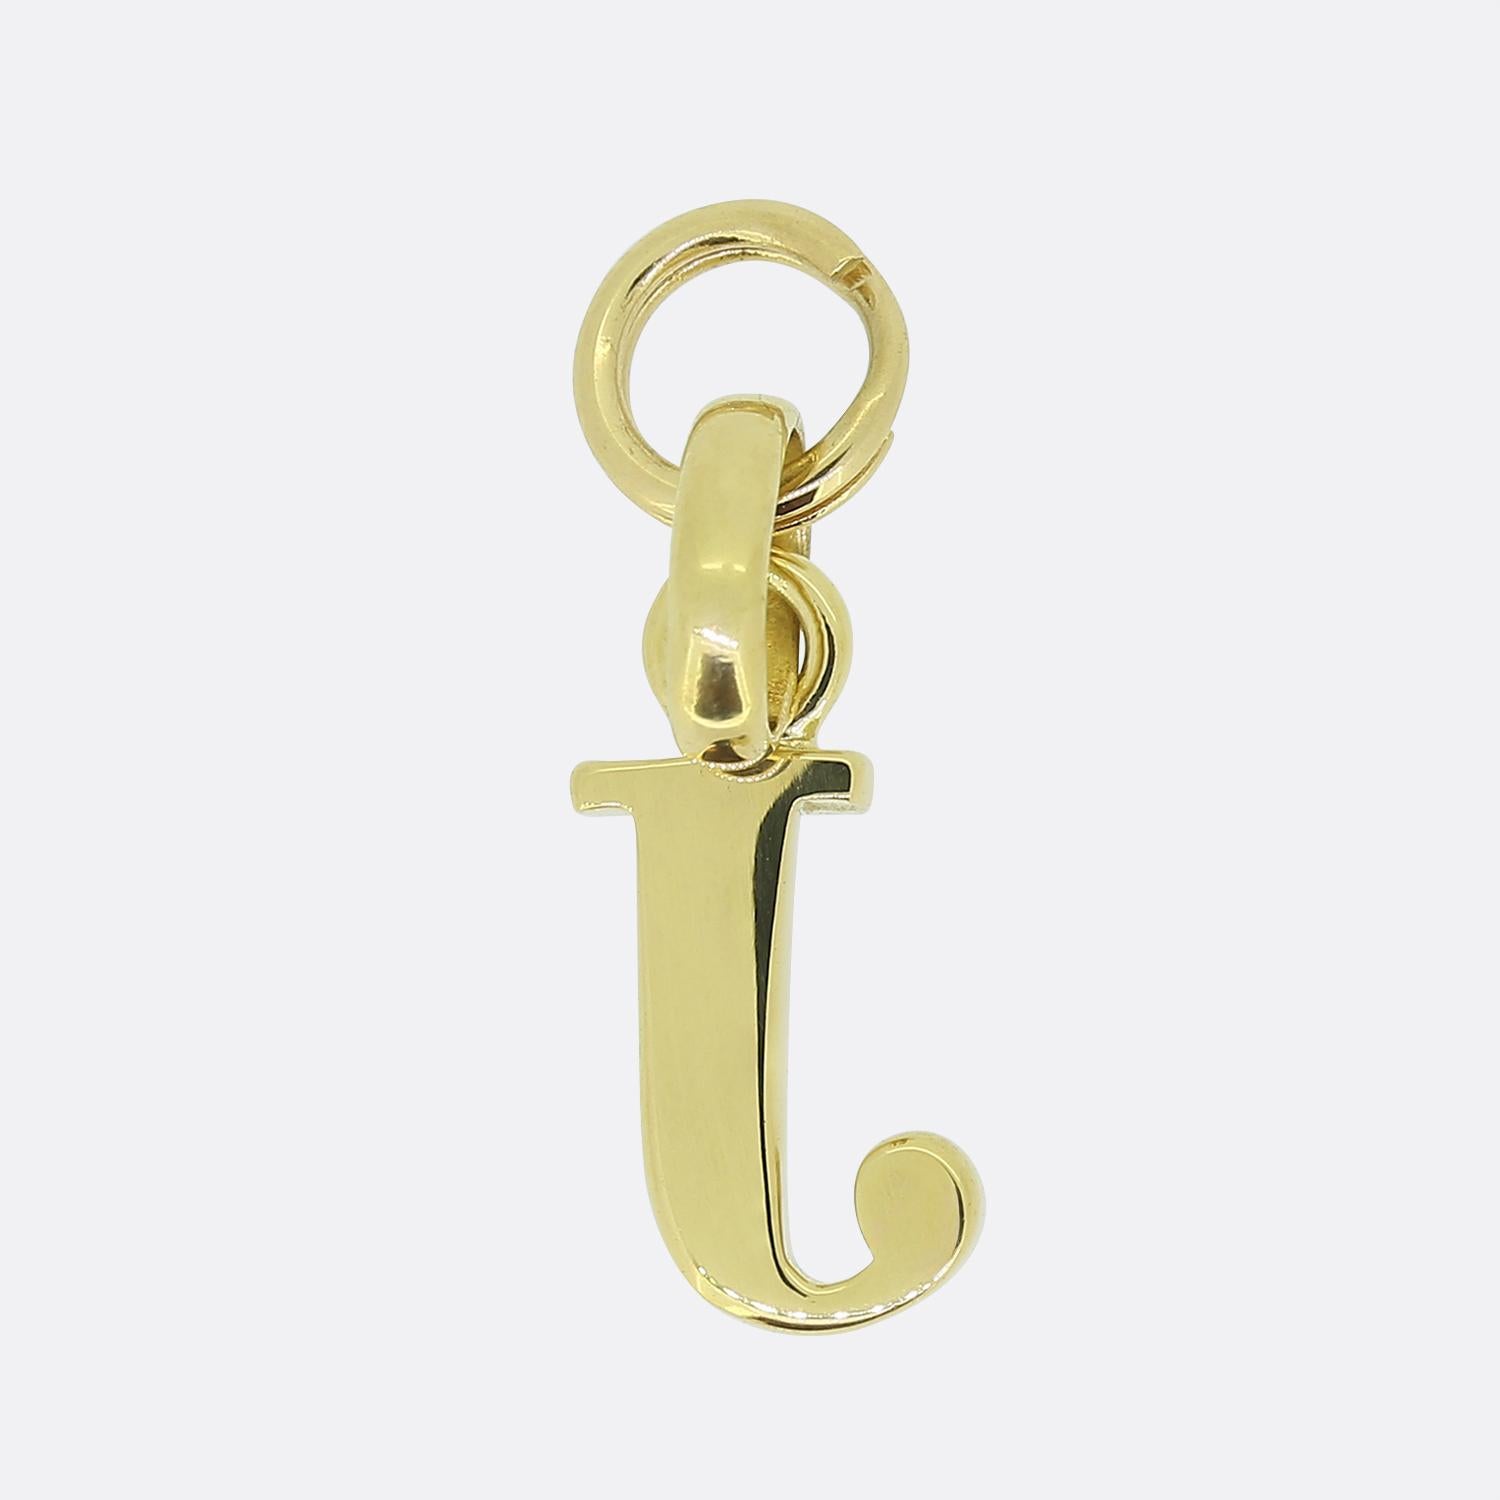 Here we have an 18ct yellow gold charm from the world-renowned (now retired) British jewellery designer, Links of London. This particular piece has been crafted into the shape of the letter 'J'. Due to its size this charm could also work equally